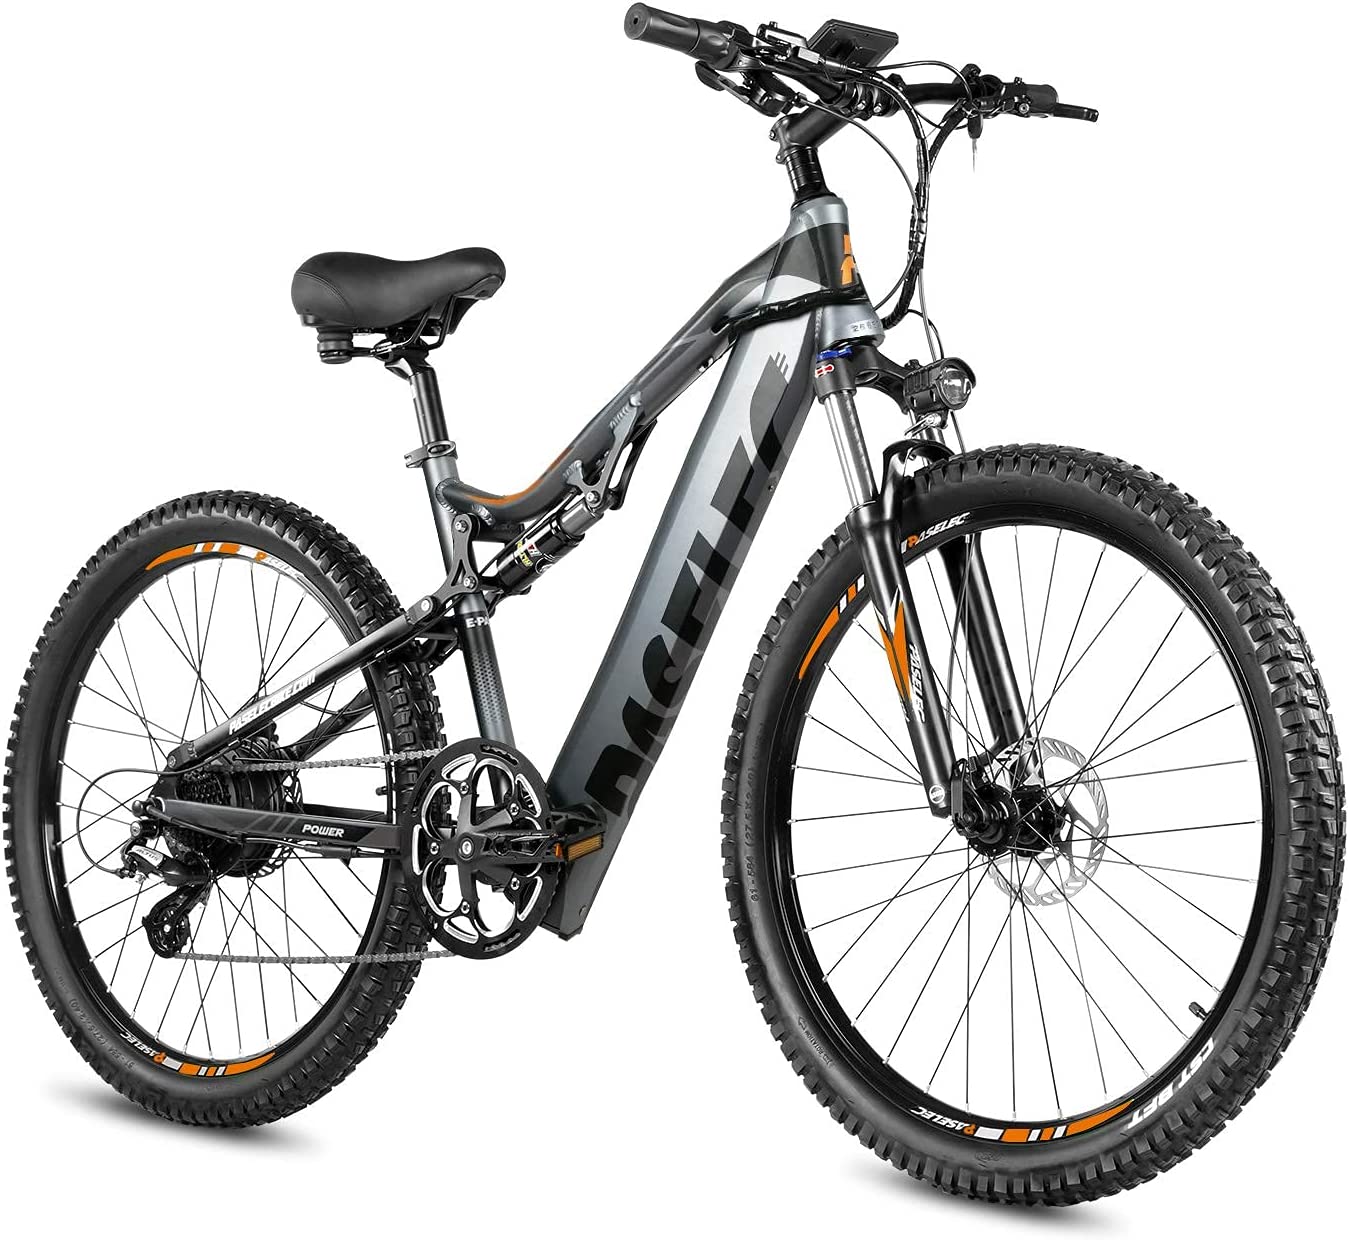 PASELEC Electric Bikes for Adult 27.5 Mountain Bike Hydraulic Brakes E-Bike Moped Full Suspension Cycle with 48V 13ah Lithium Battery, Peak 750W Powerful Motor Professional 9 Speed E-MTB Bicycle